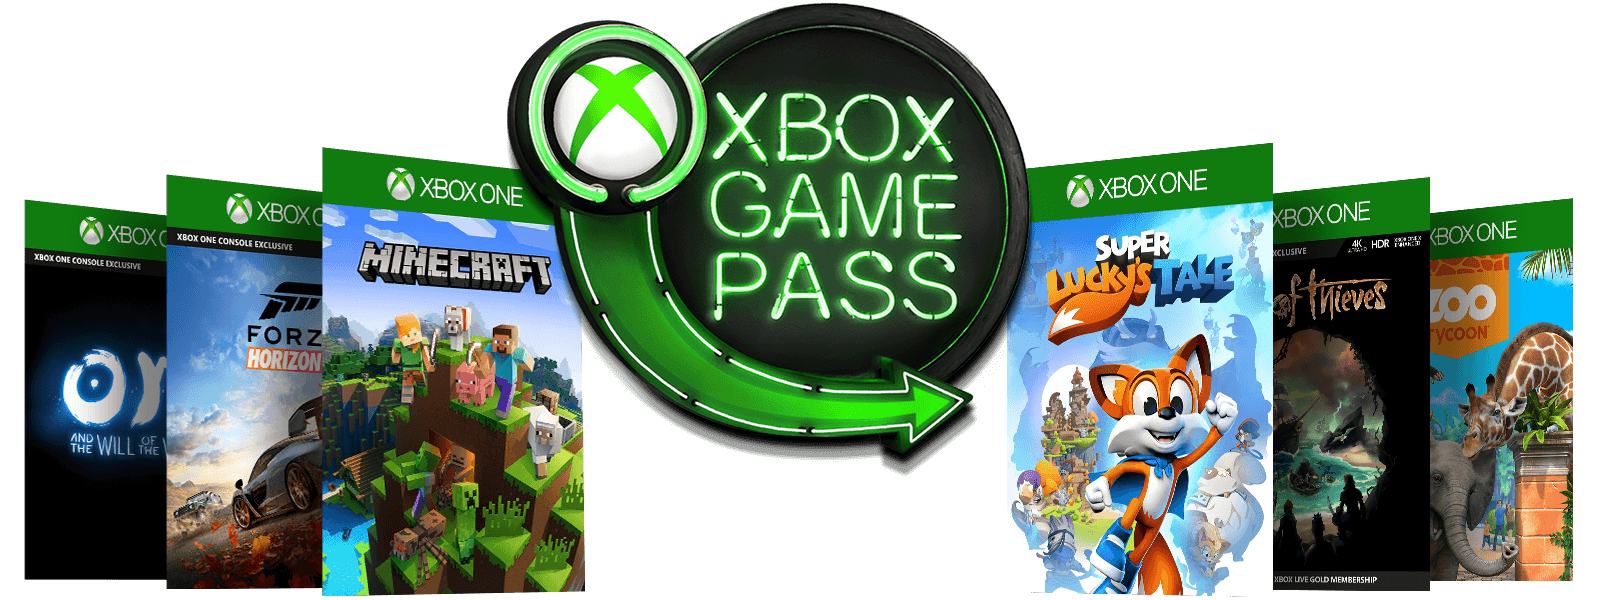 xbox game pass ultimate minecraft pc